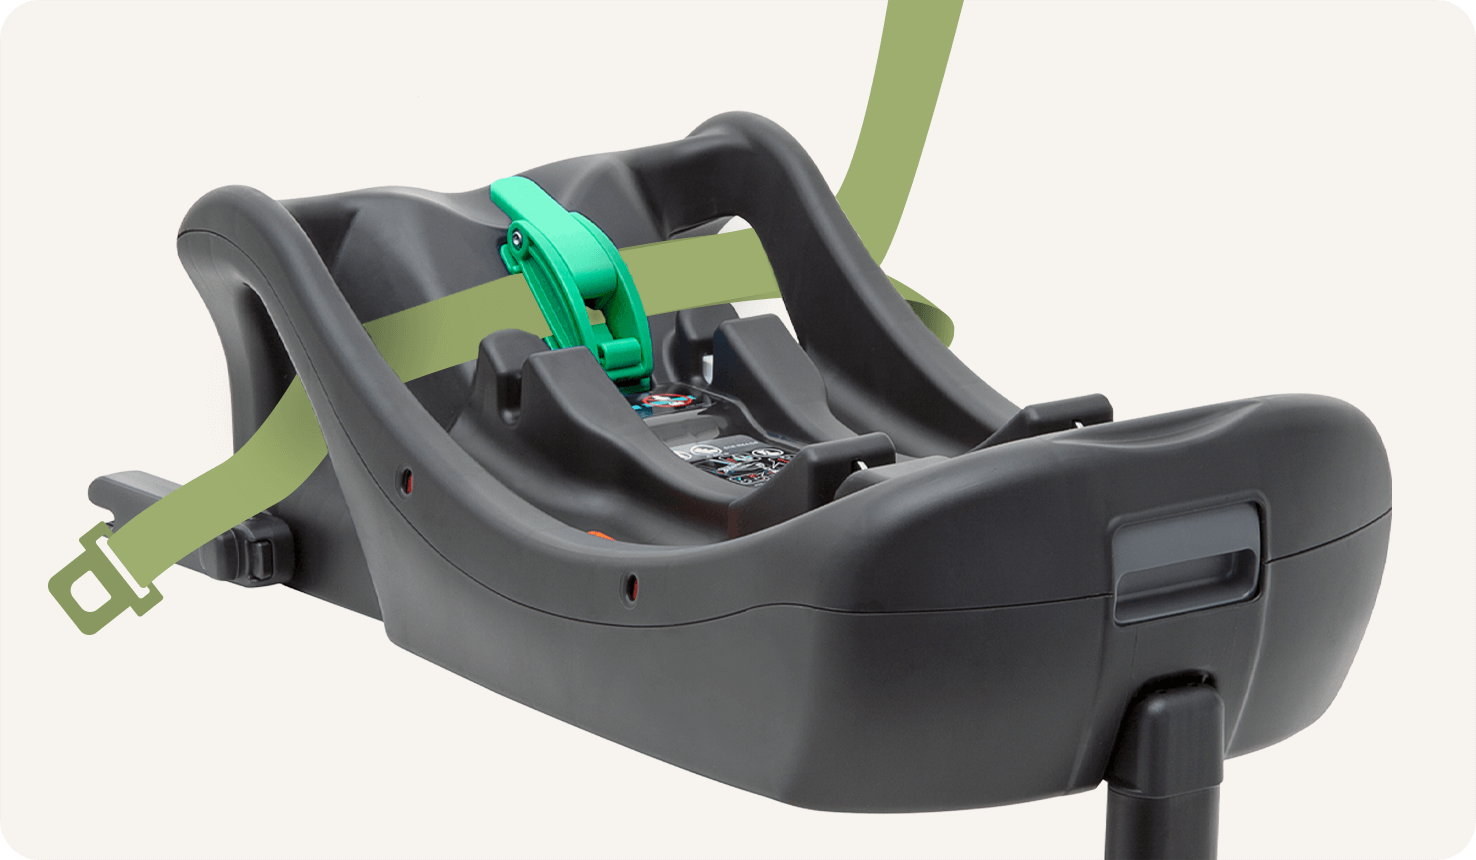  Left angle view of the Joie i-Base 2 car seat base with an illustrated seatbelt demonstrating the installation path. 